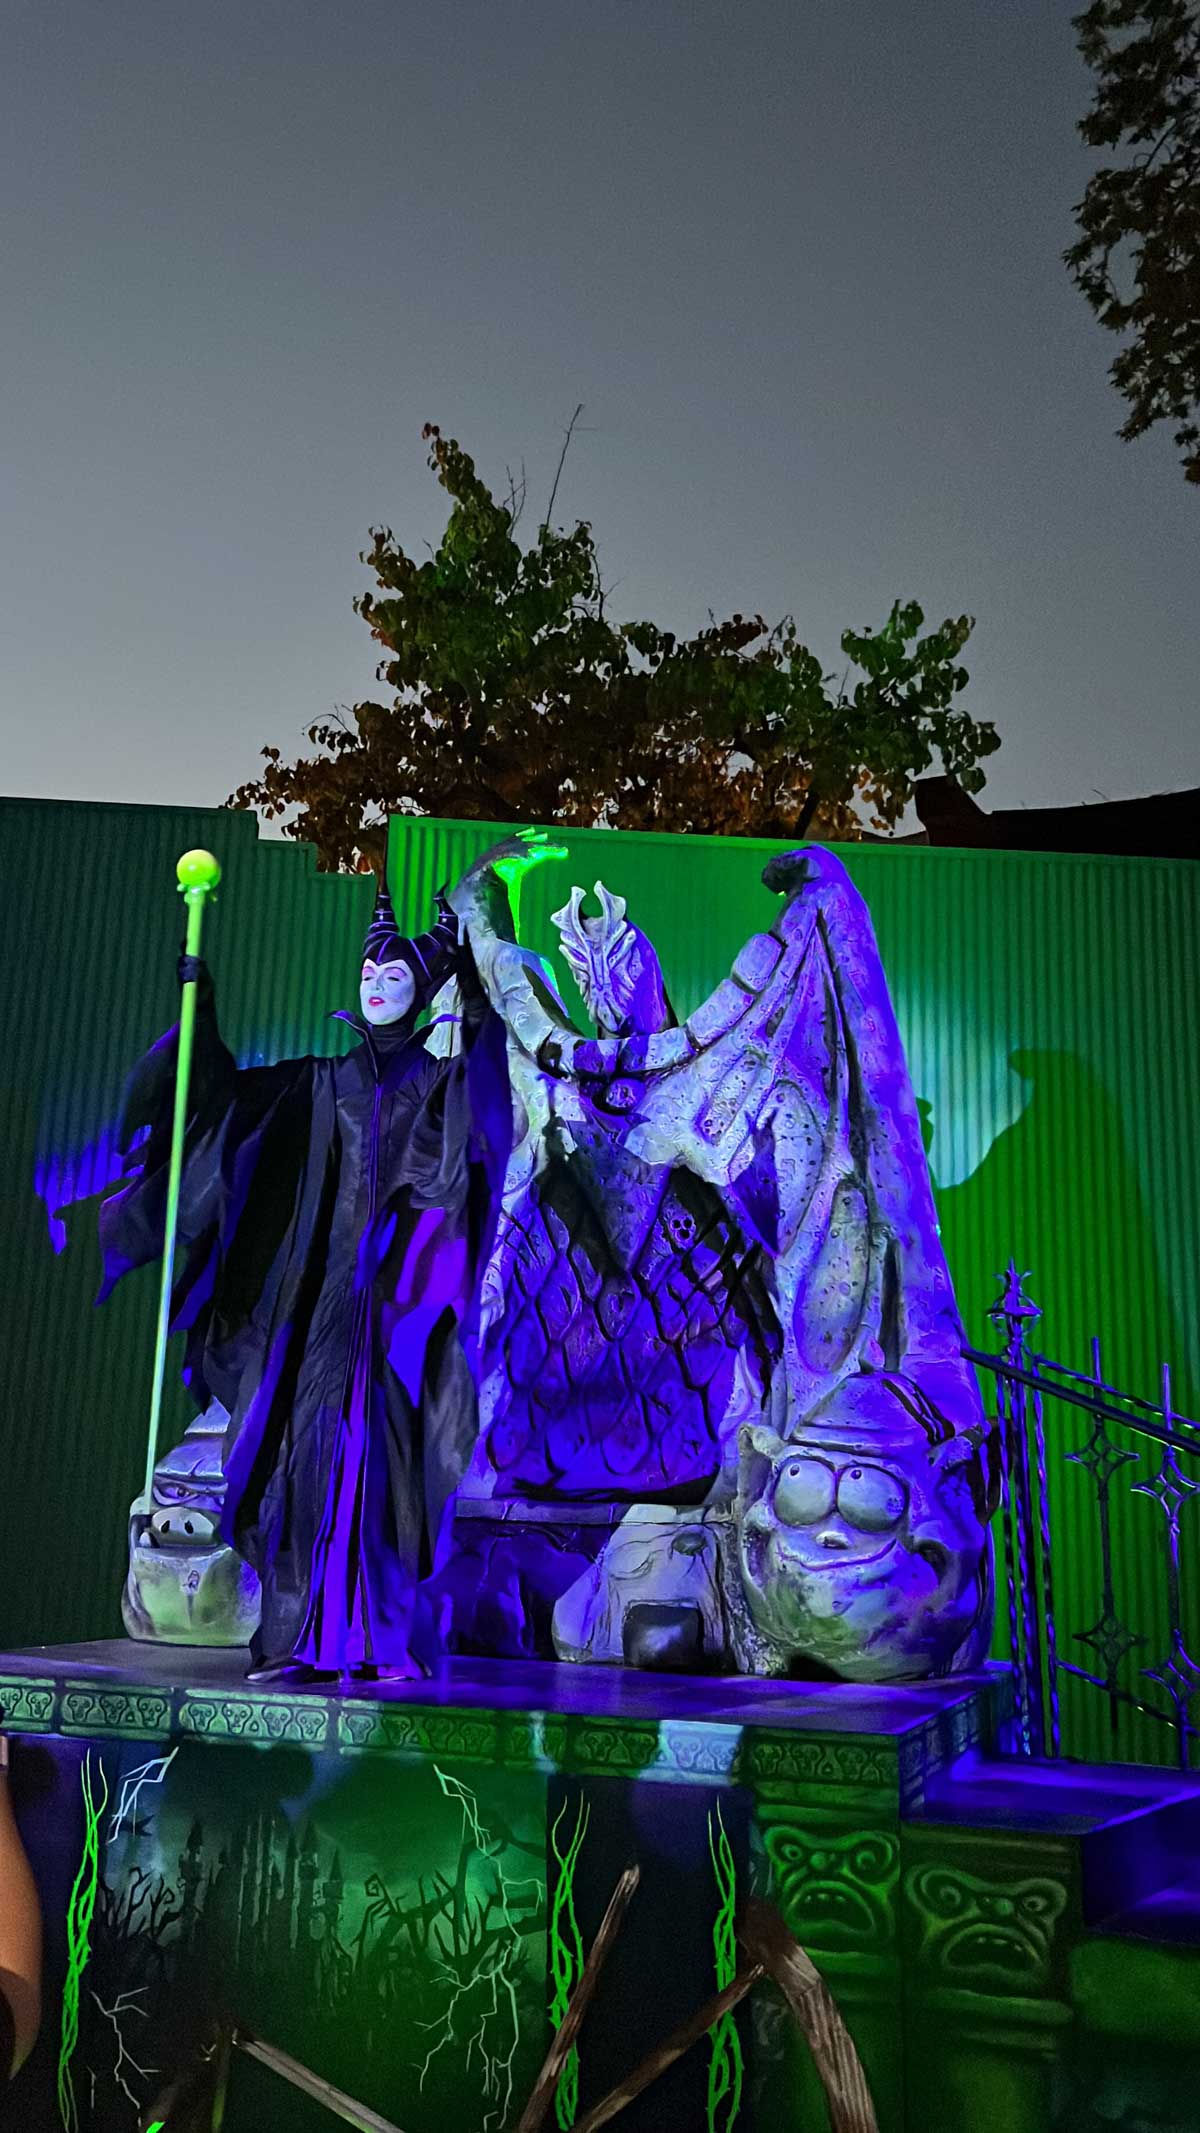 Malificient at Oogie Boogie Bash